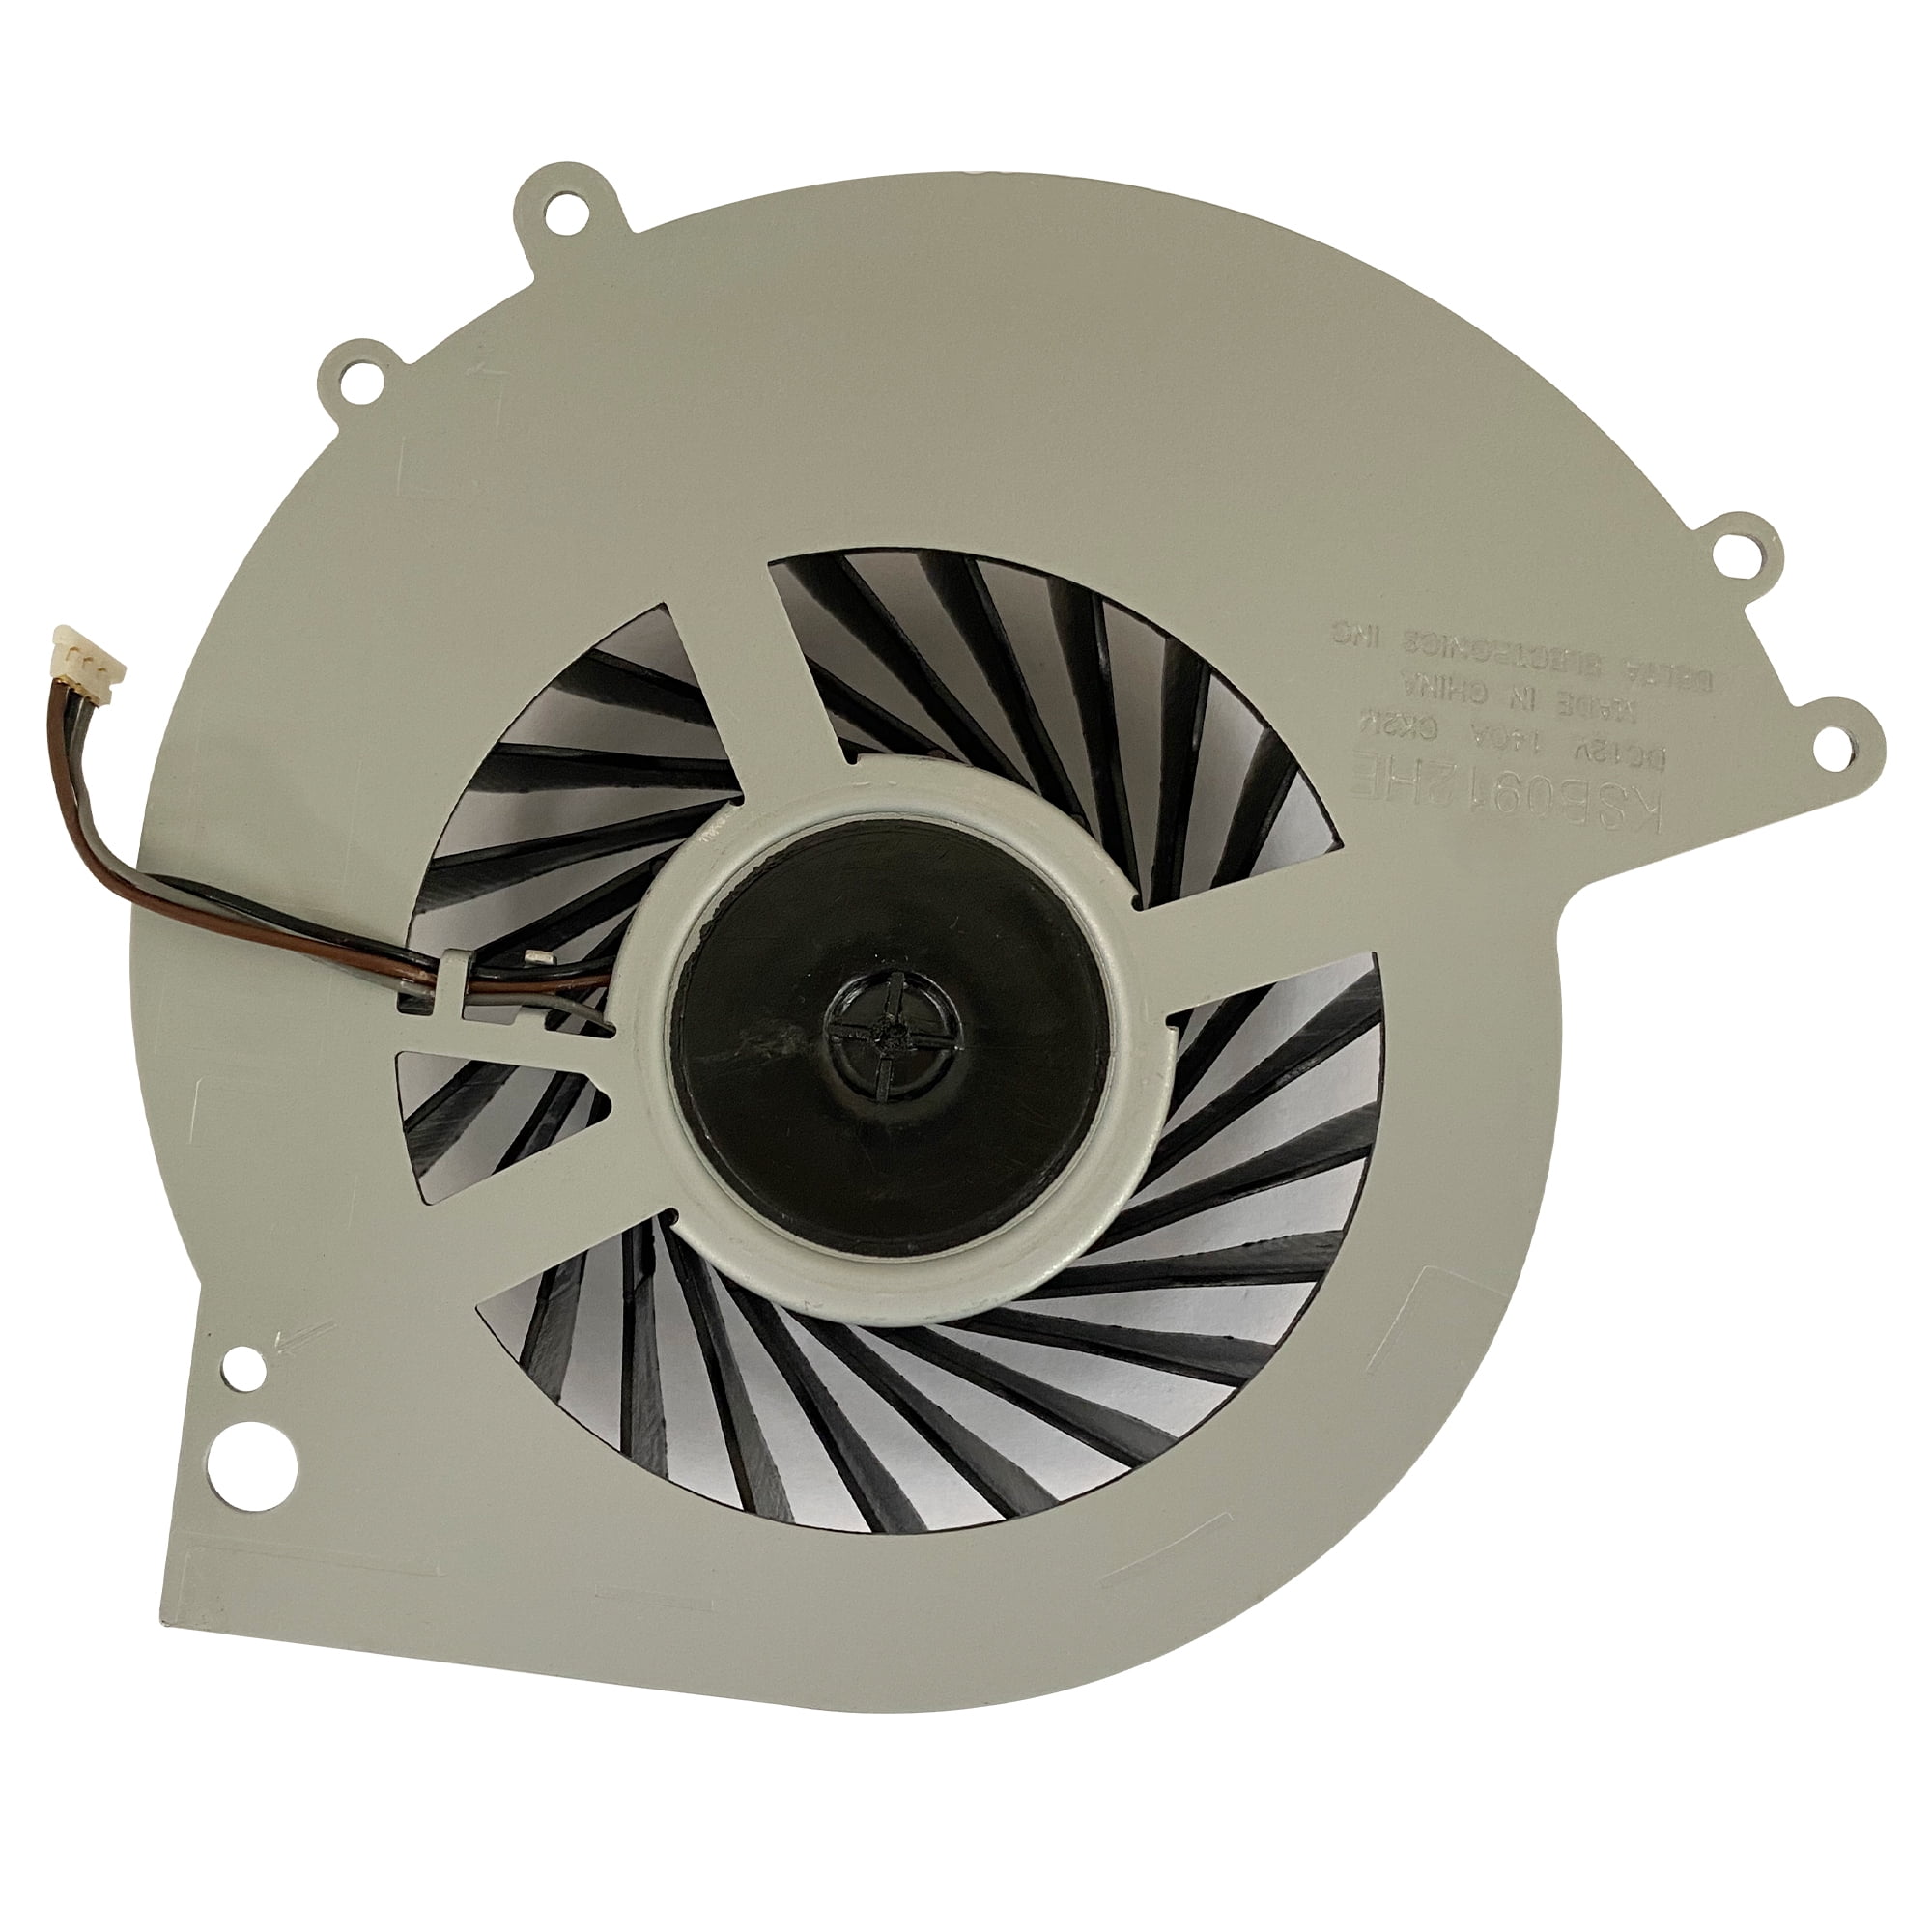 Dum nøgle morbiditet QUETTERLEE Replacement Internal Cooling Fan for Sony PS4 Fan ps4 CUH-1000  CUH-1001A CUH-11XX CUH-1000AB01 CUH-1000AB02 1115A 1115B 500GB KSB0912HE  Note: This Item can not fit for PS4 CUH-1200 Series - Walmart.com